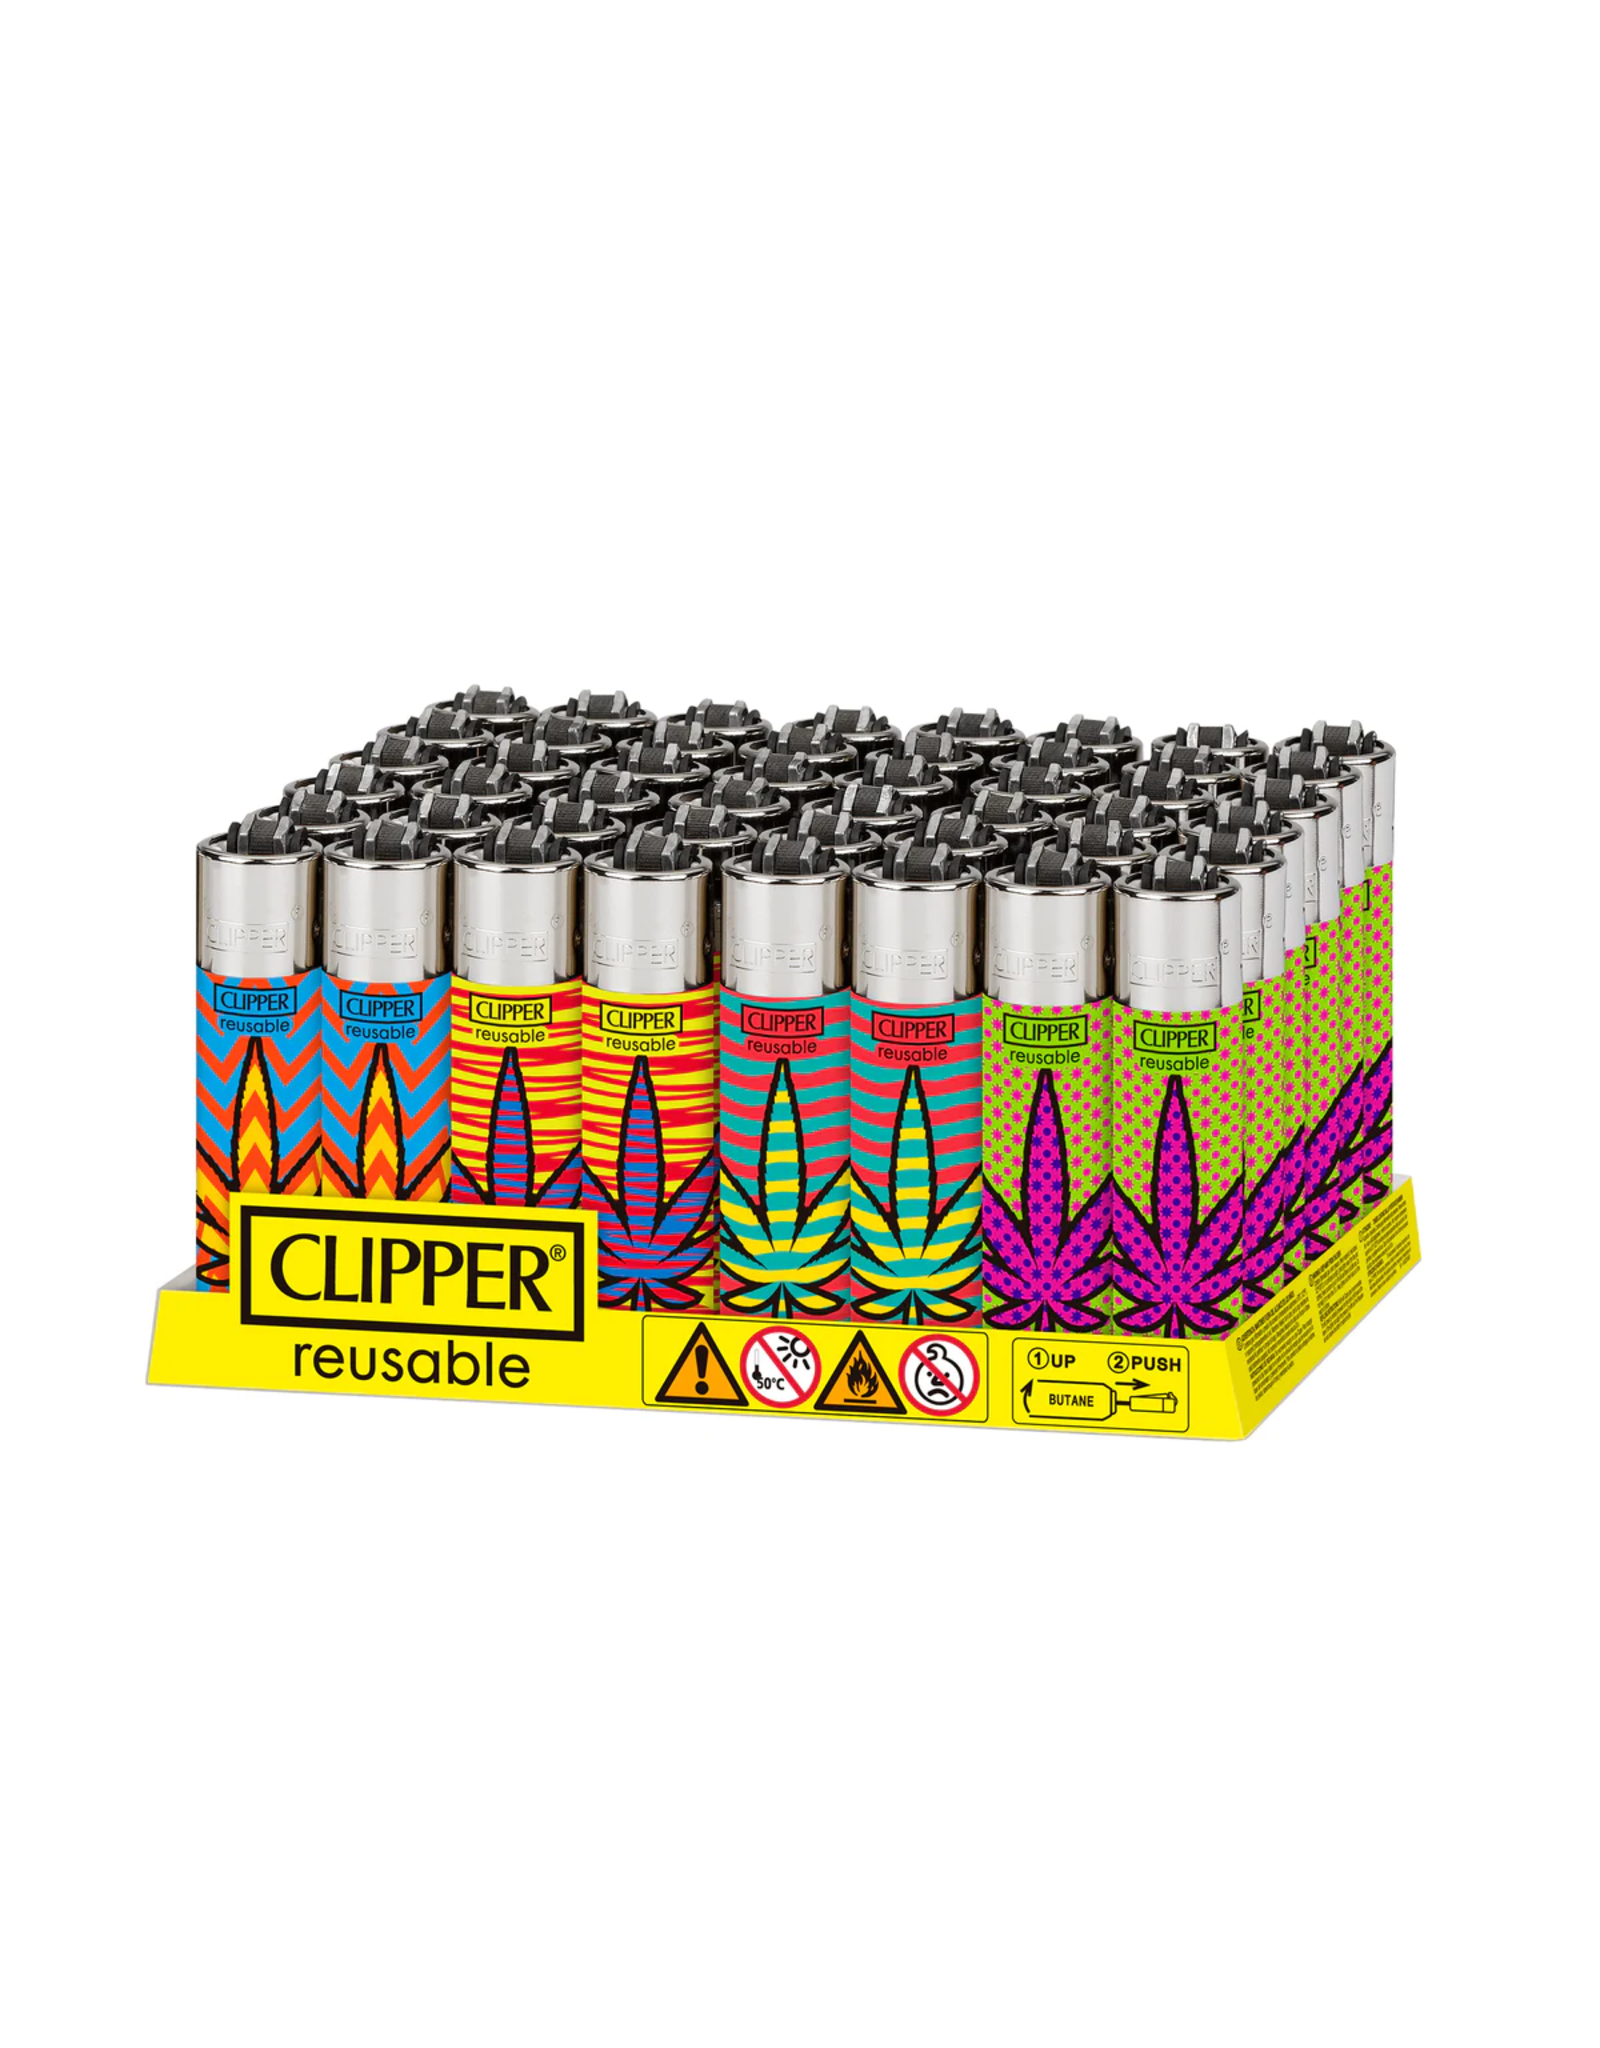 Clipper Lighters Clipper Classic Large Lighter - Printed - Renzo Leaves Box 48ct